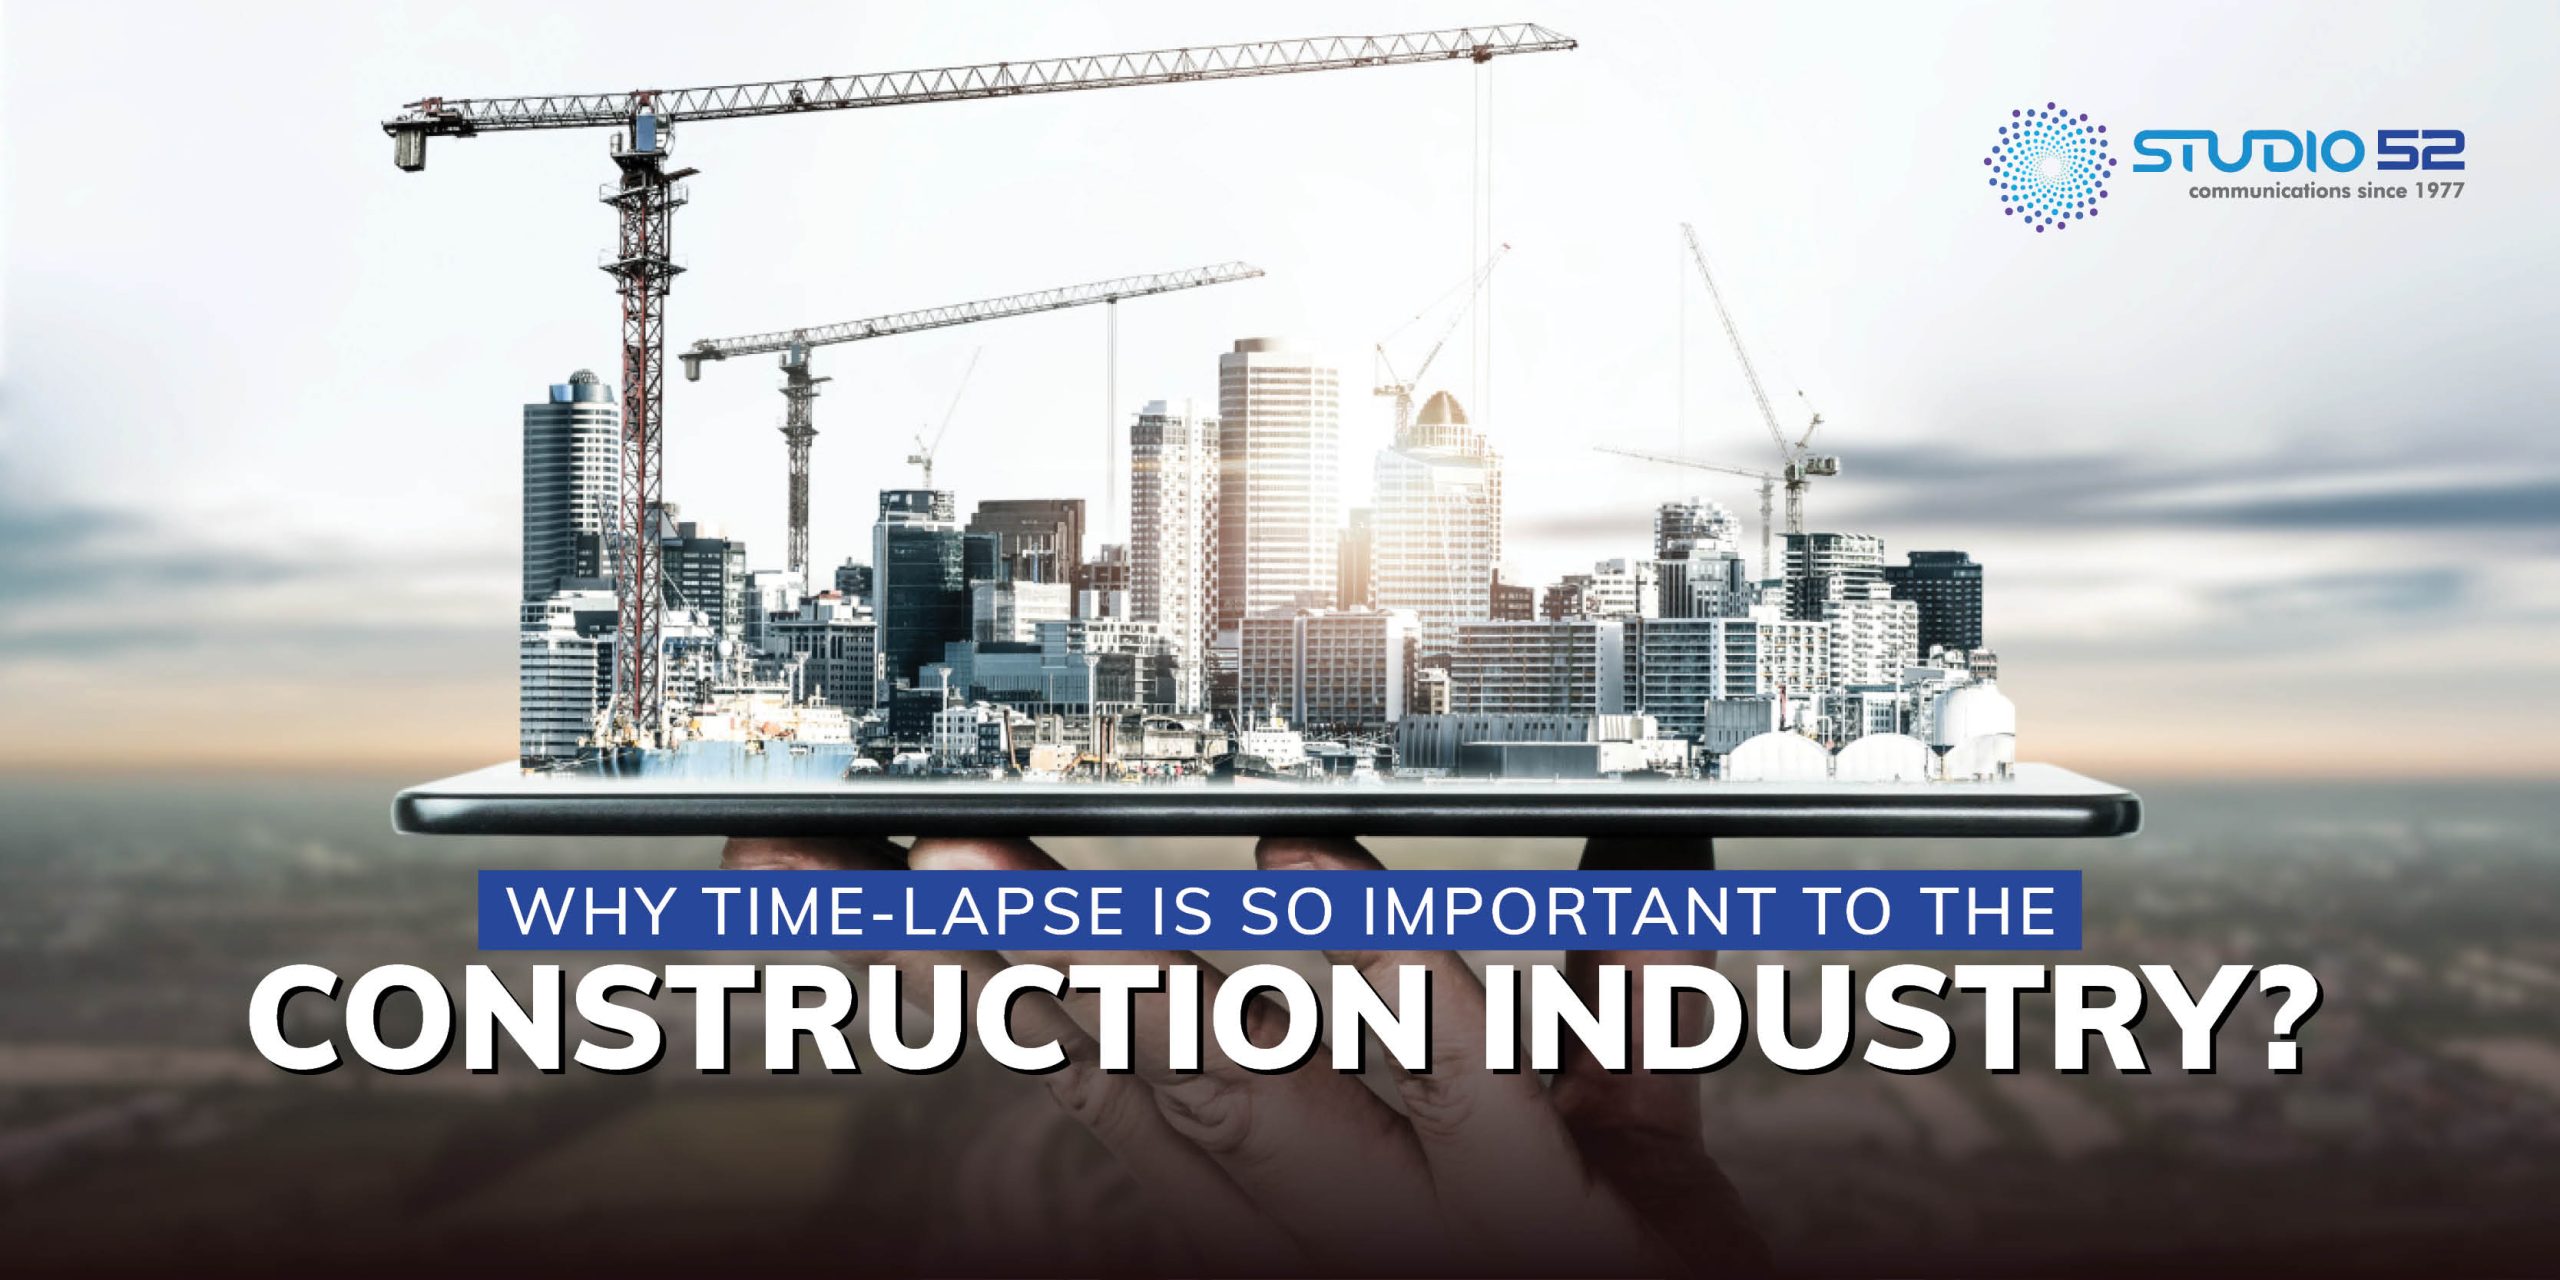 Why Time-Lapse is So Important to the Construction Industry? - Studio 52